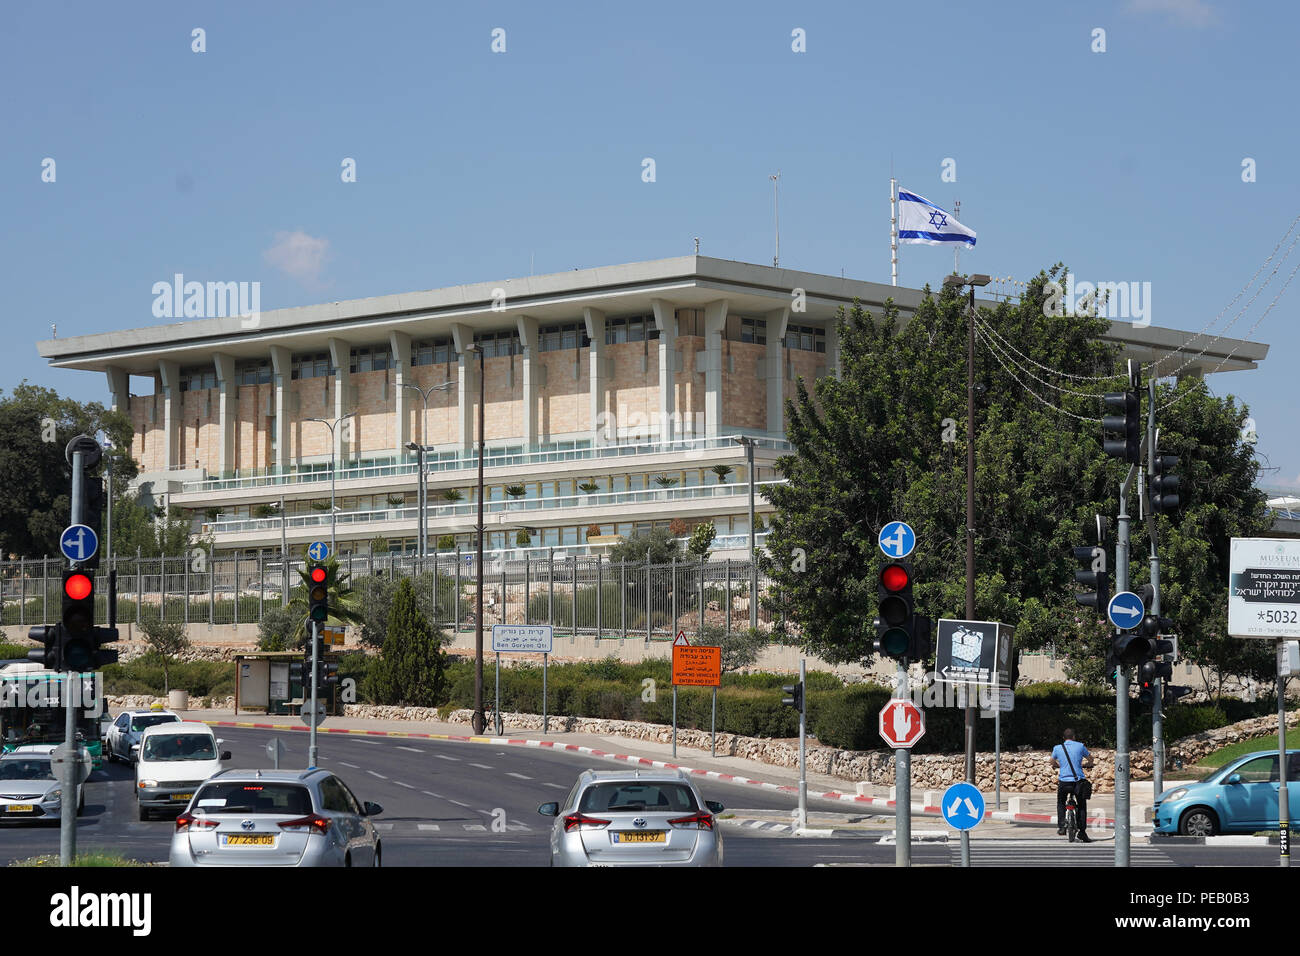 A view of the Knesset, the Israeli parliament. From a series of travel photos taken in Jerusalem and nearby areas. Photo date: Monday, July 30, 2018.  Stock Photo